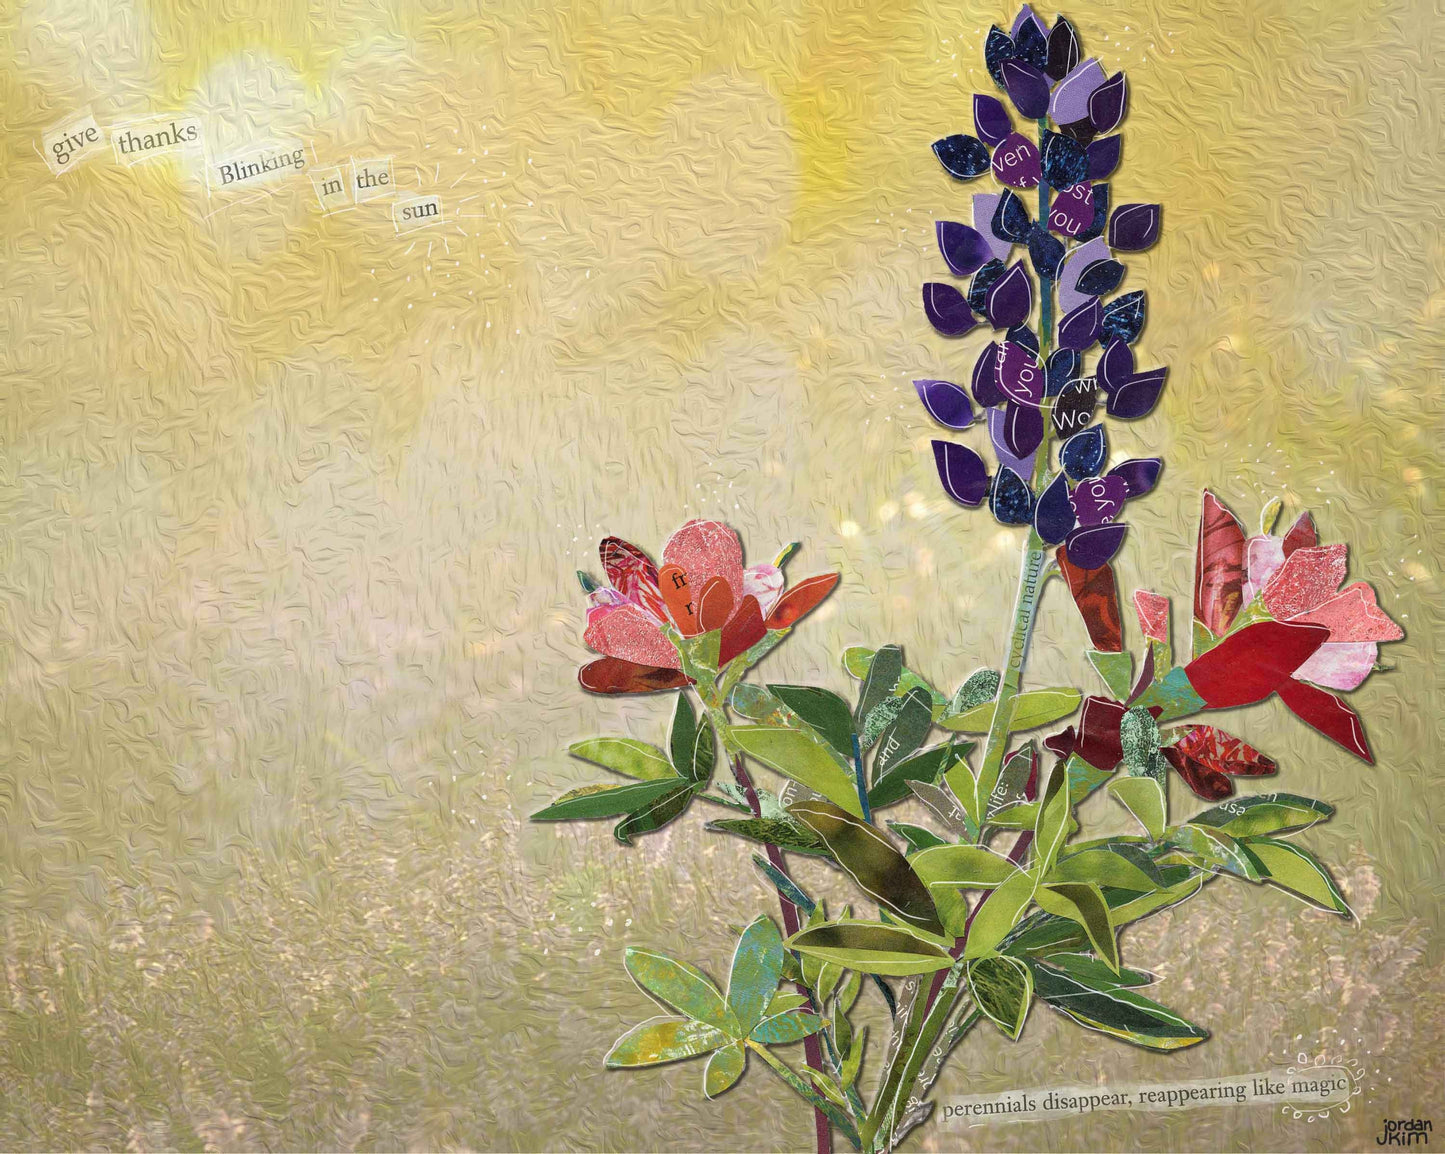 8x10 Art print of a Paper Collage of Lupine and Indian Paintbrush - Inspirational - Wall Art